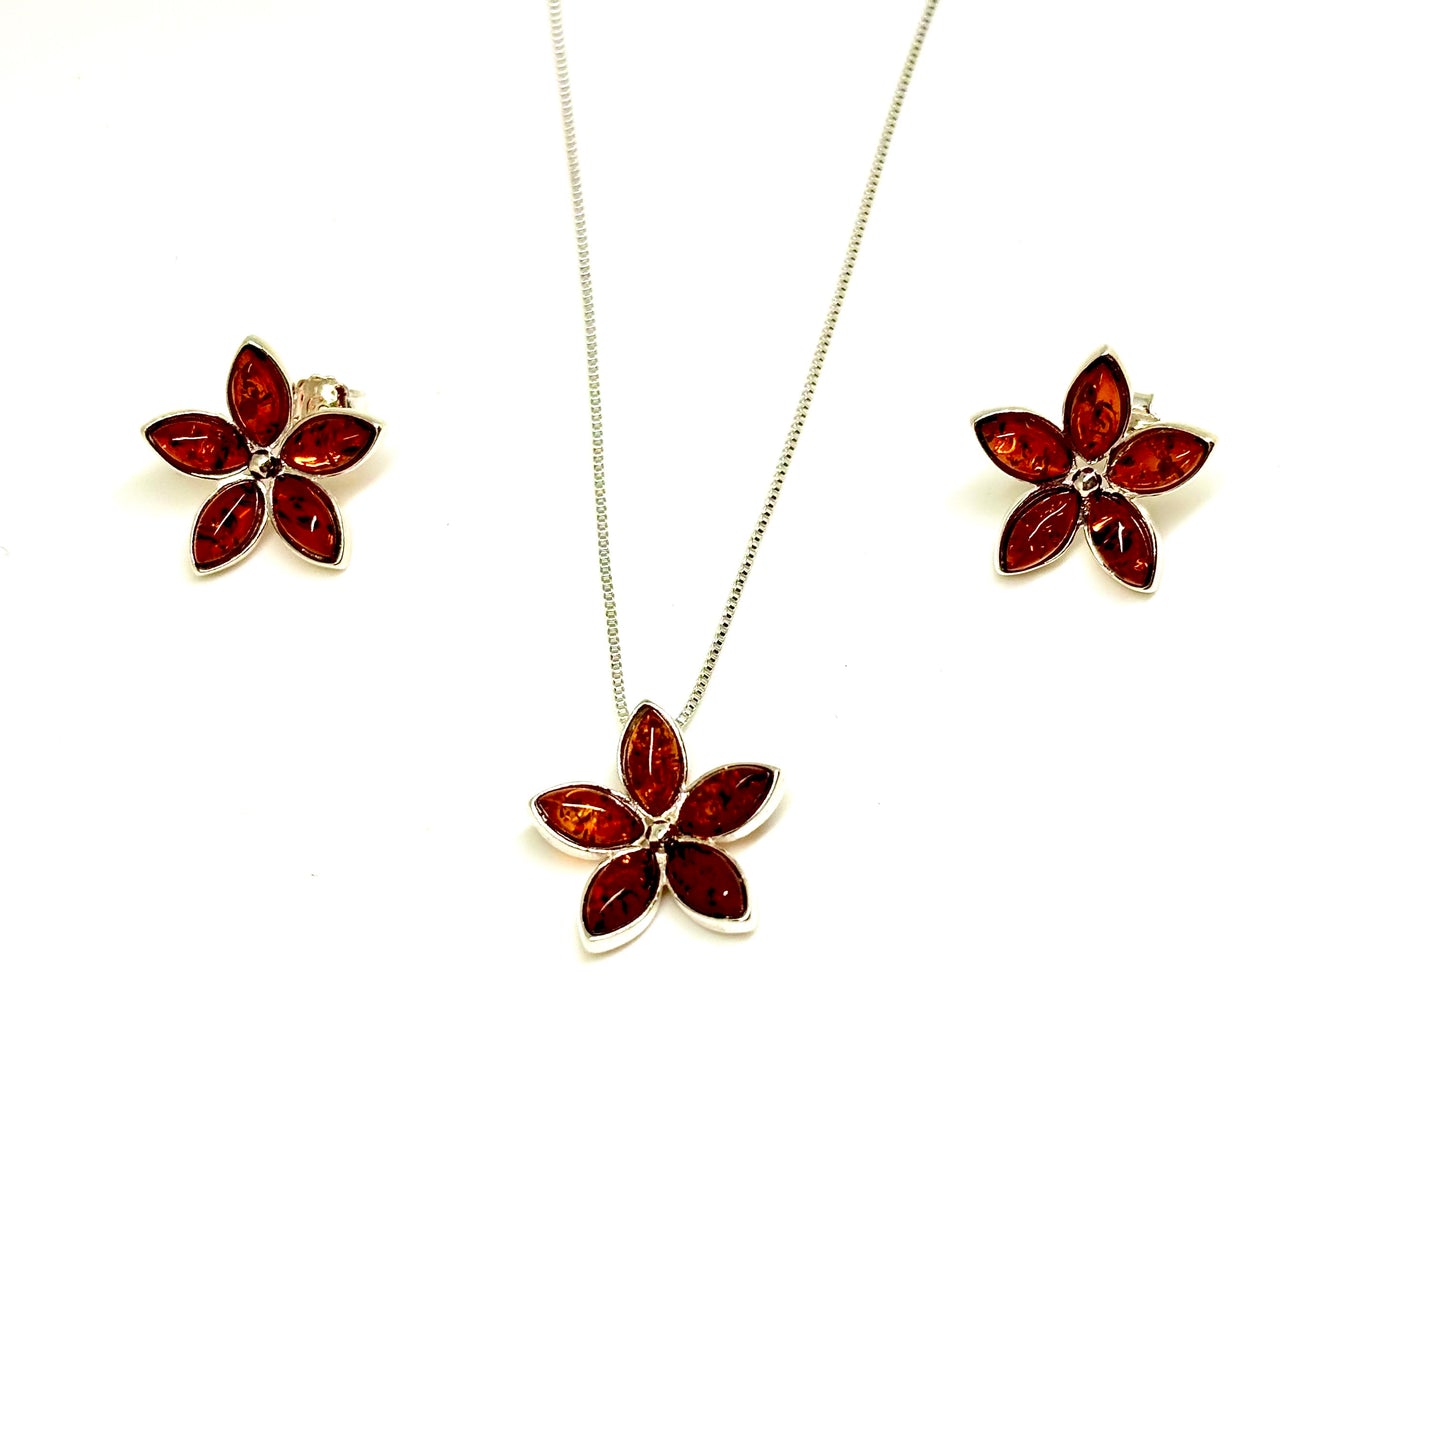 Cognac Color Baltic Amber Flower Pendant Necklace and Earrings Set